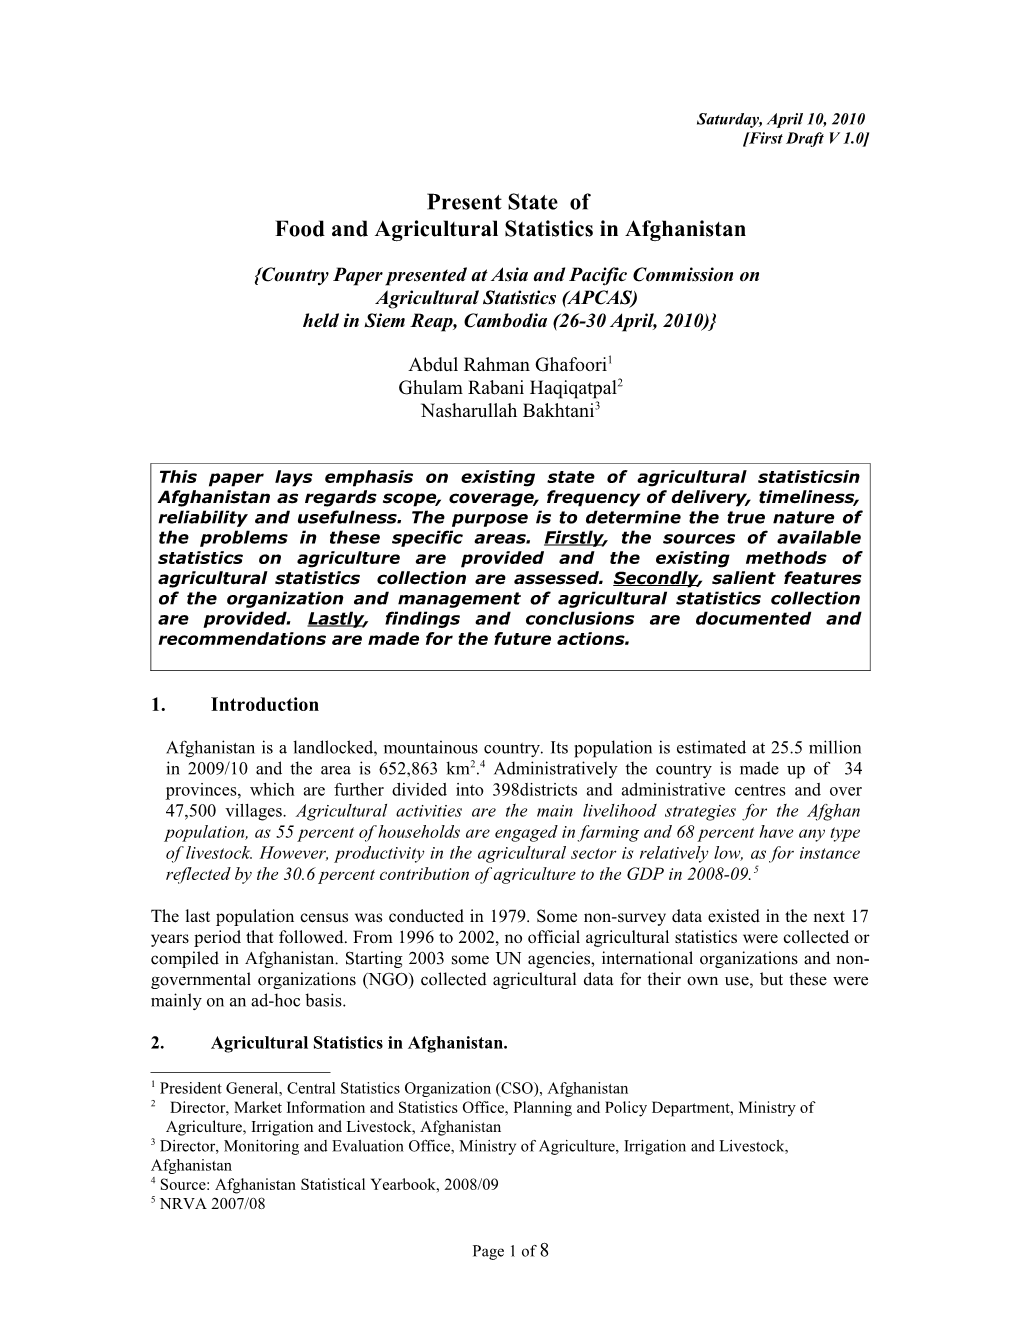 A Review Of The Existing System Of Agricultural Statistics In Afghanistan